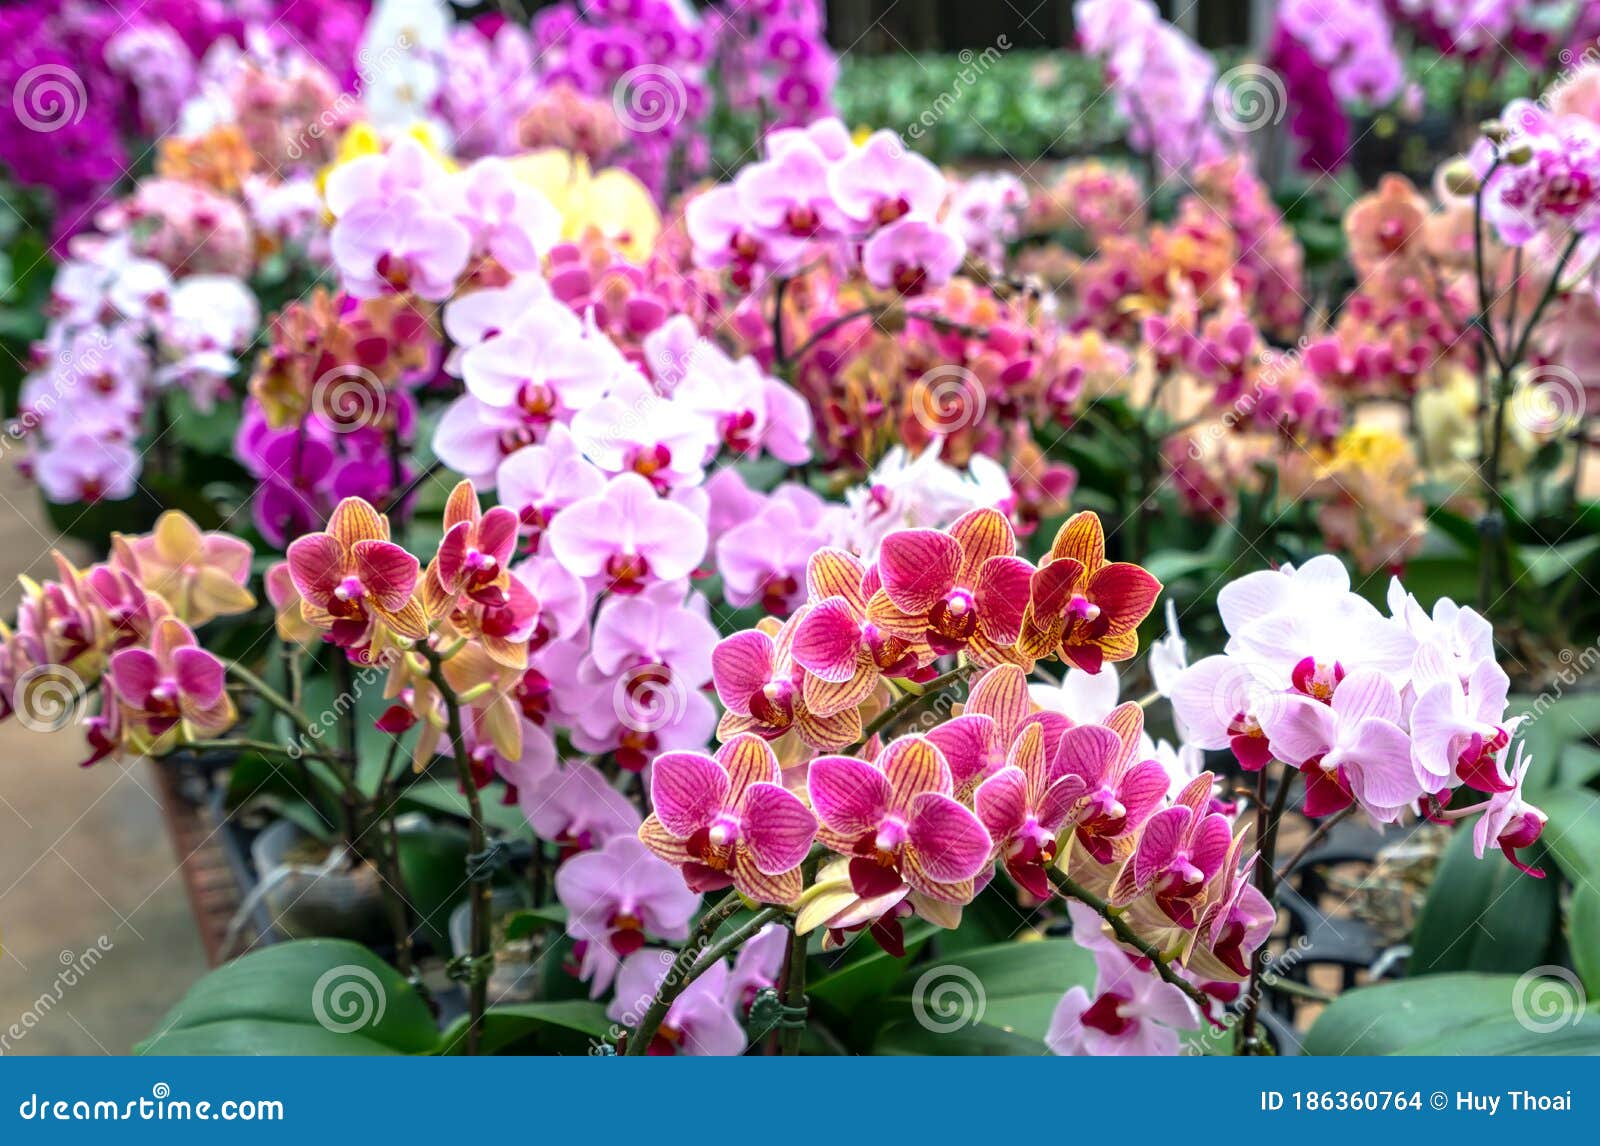 Phalaenopsis Orchids Bloom In A Variety Of Colors In The Garden Stock Photo Image Of Bouquet Freshness 186360764